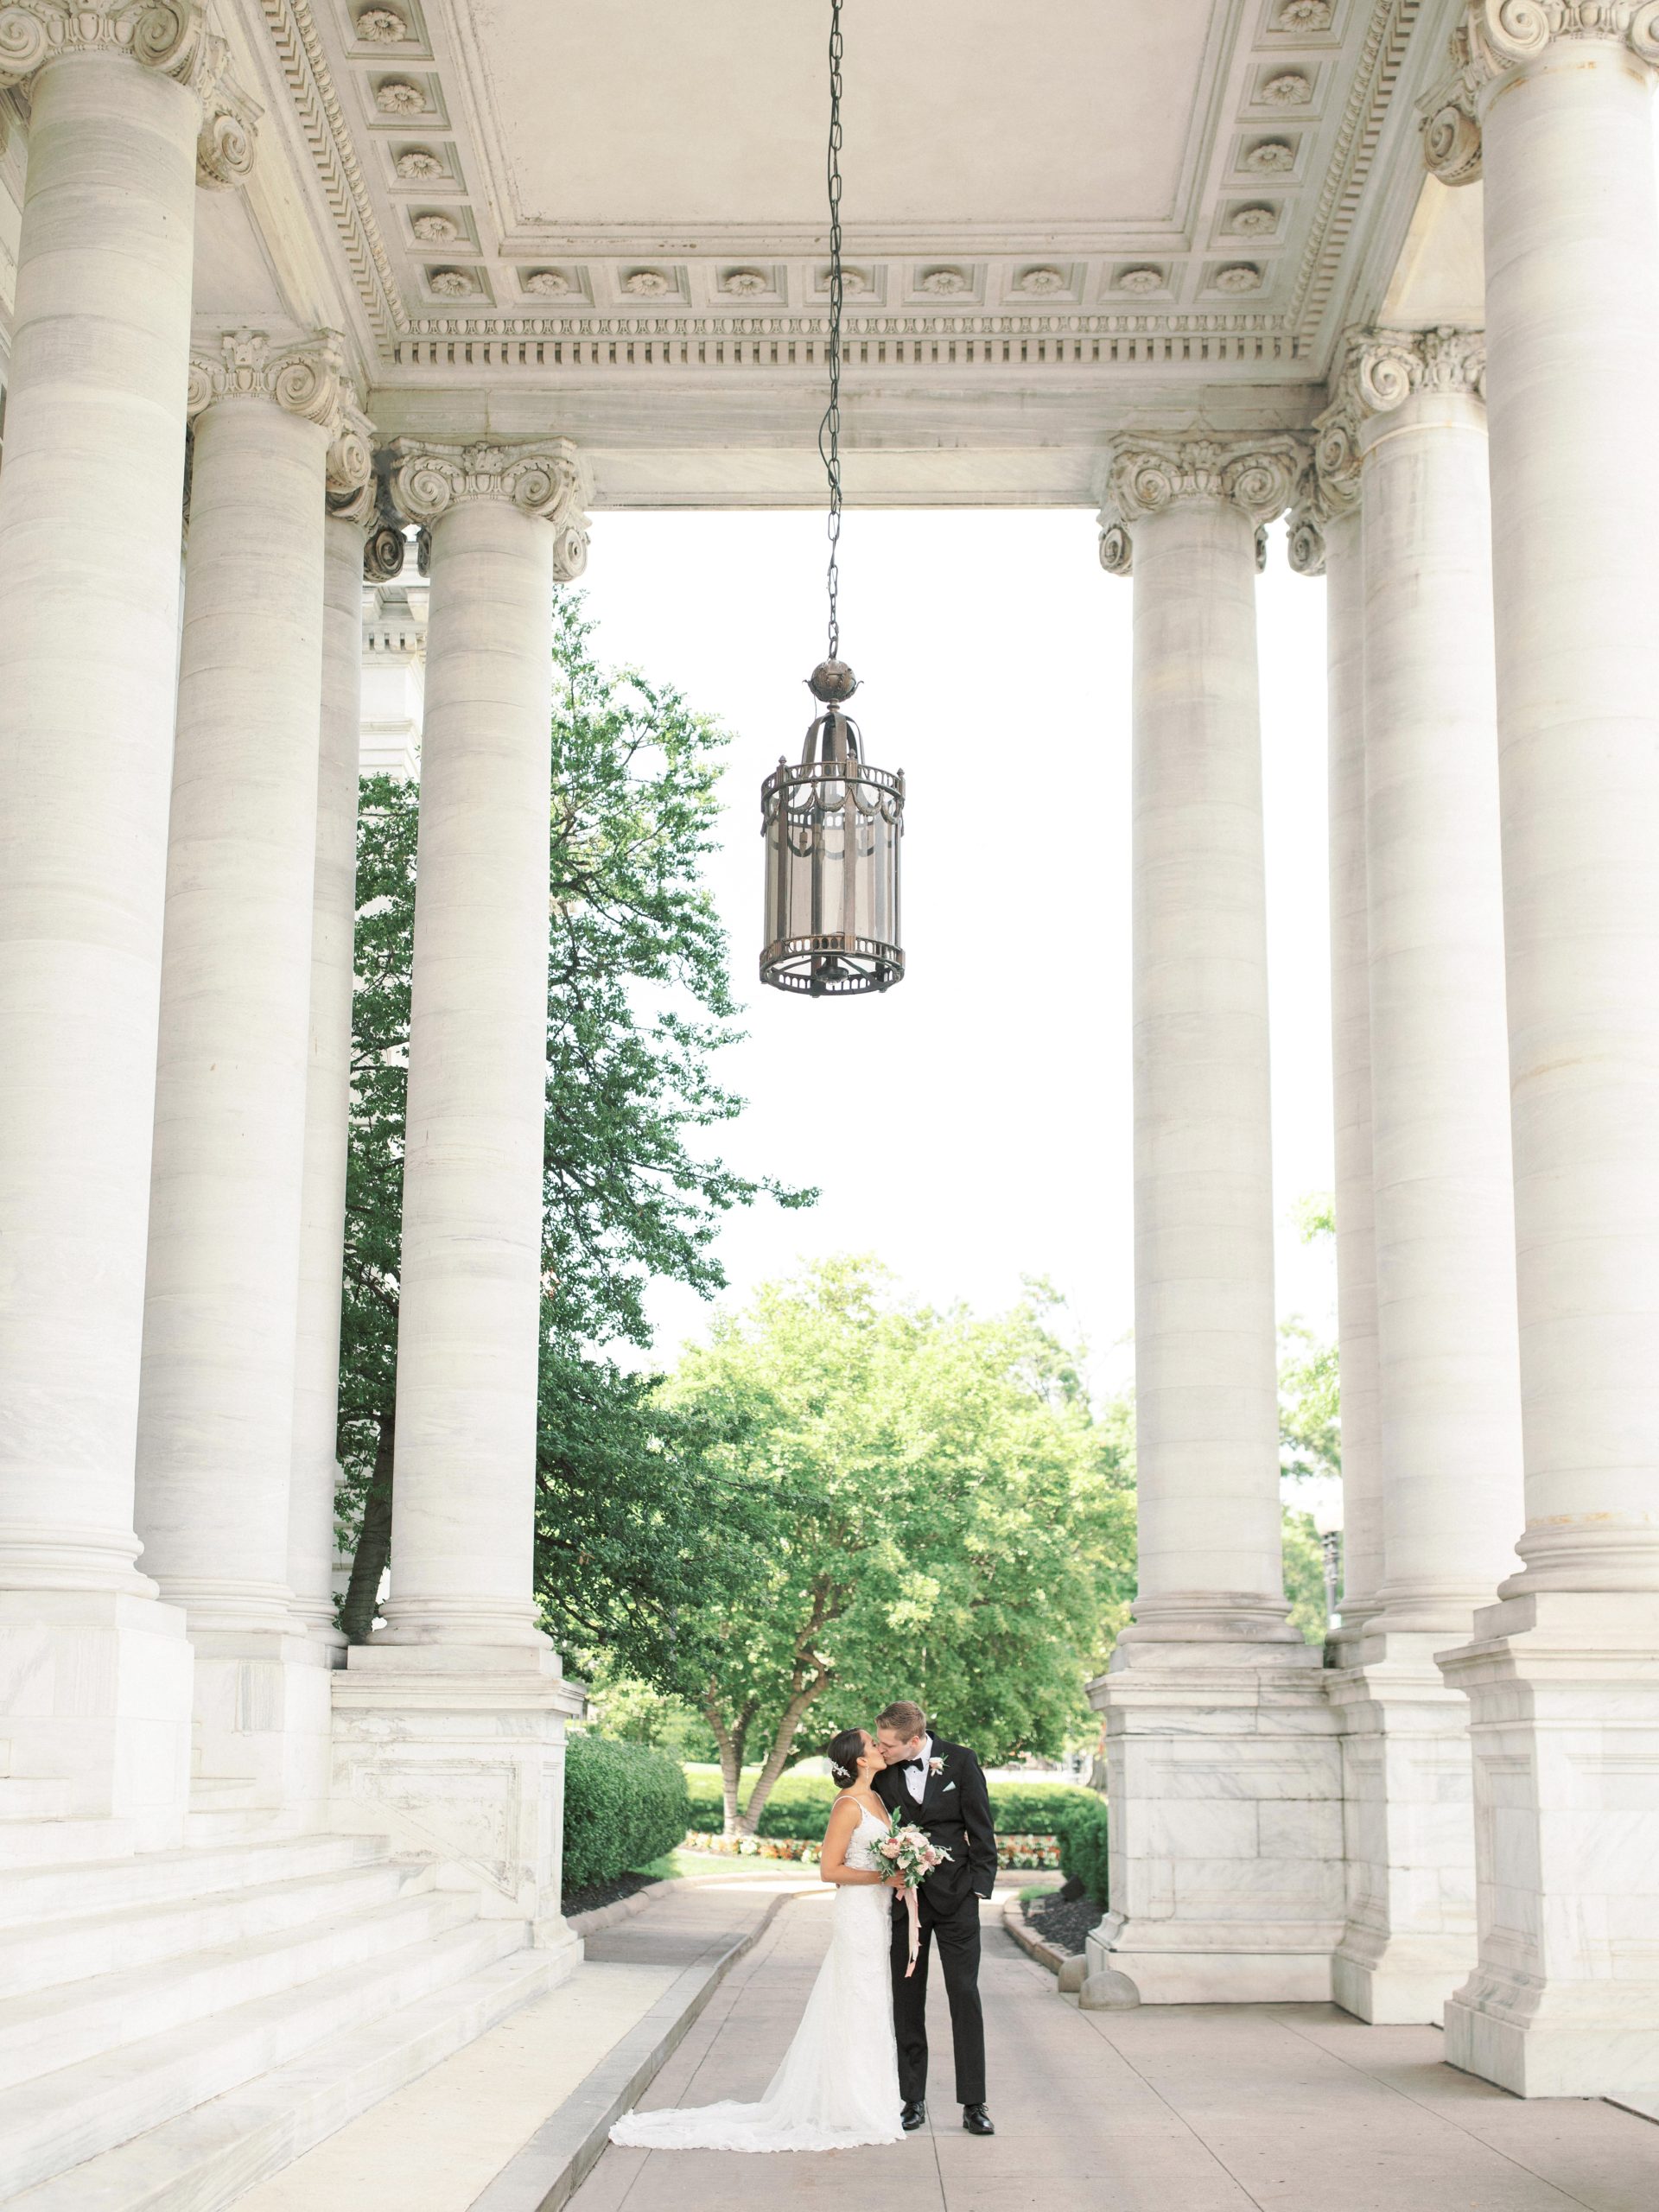 An elegant black-tie wedding at DAR Constitution Hall in Washington, DC. Photographed by DC wedding photographer, Alicia Lacey.